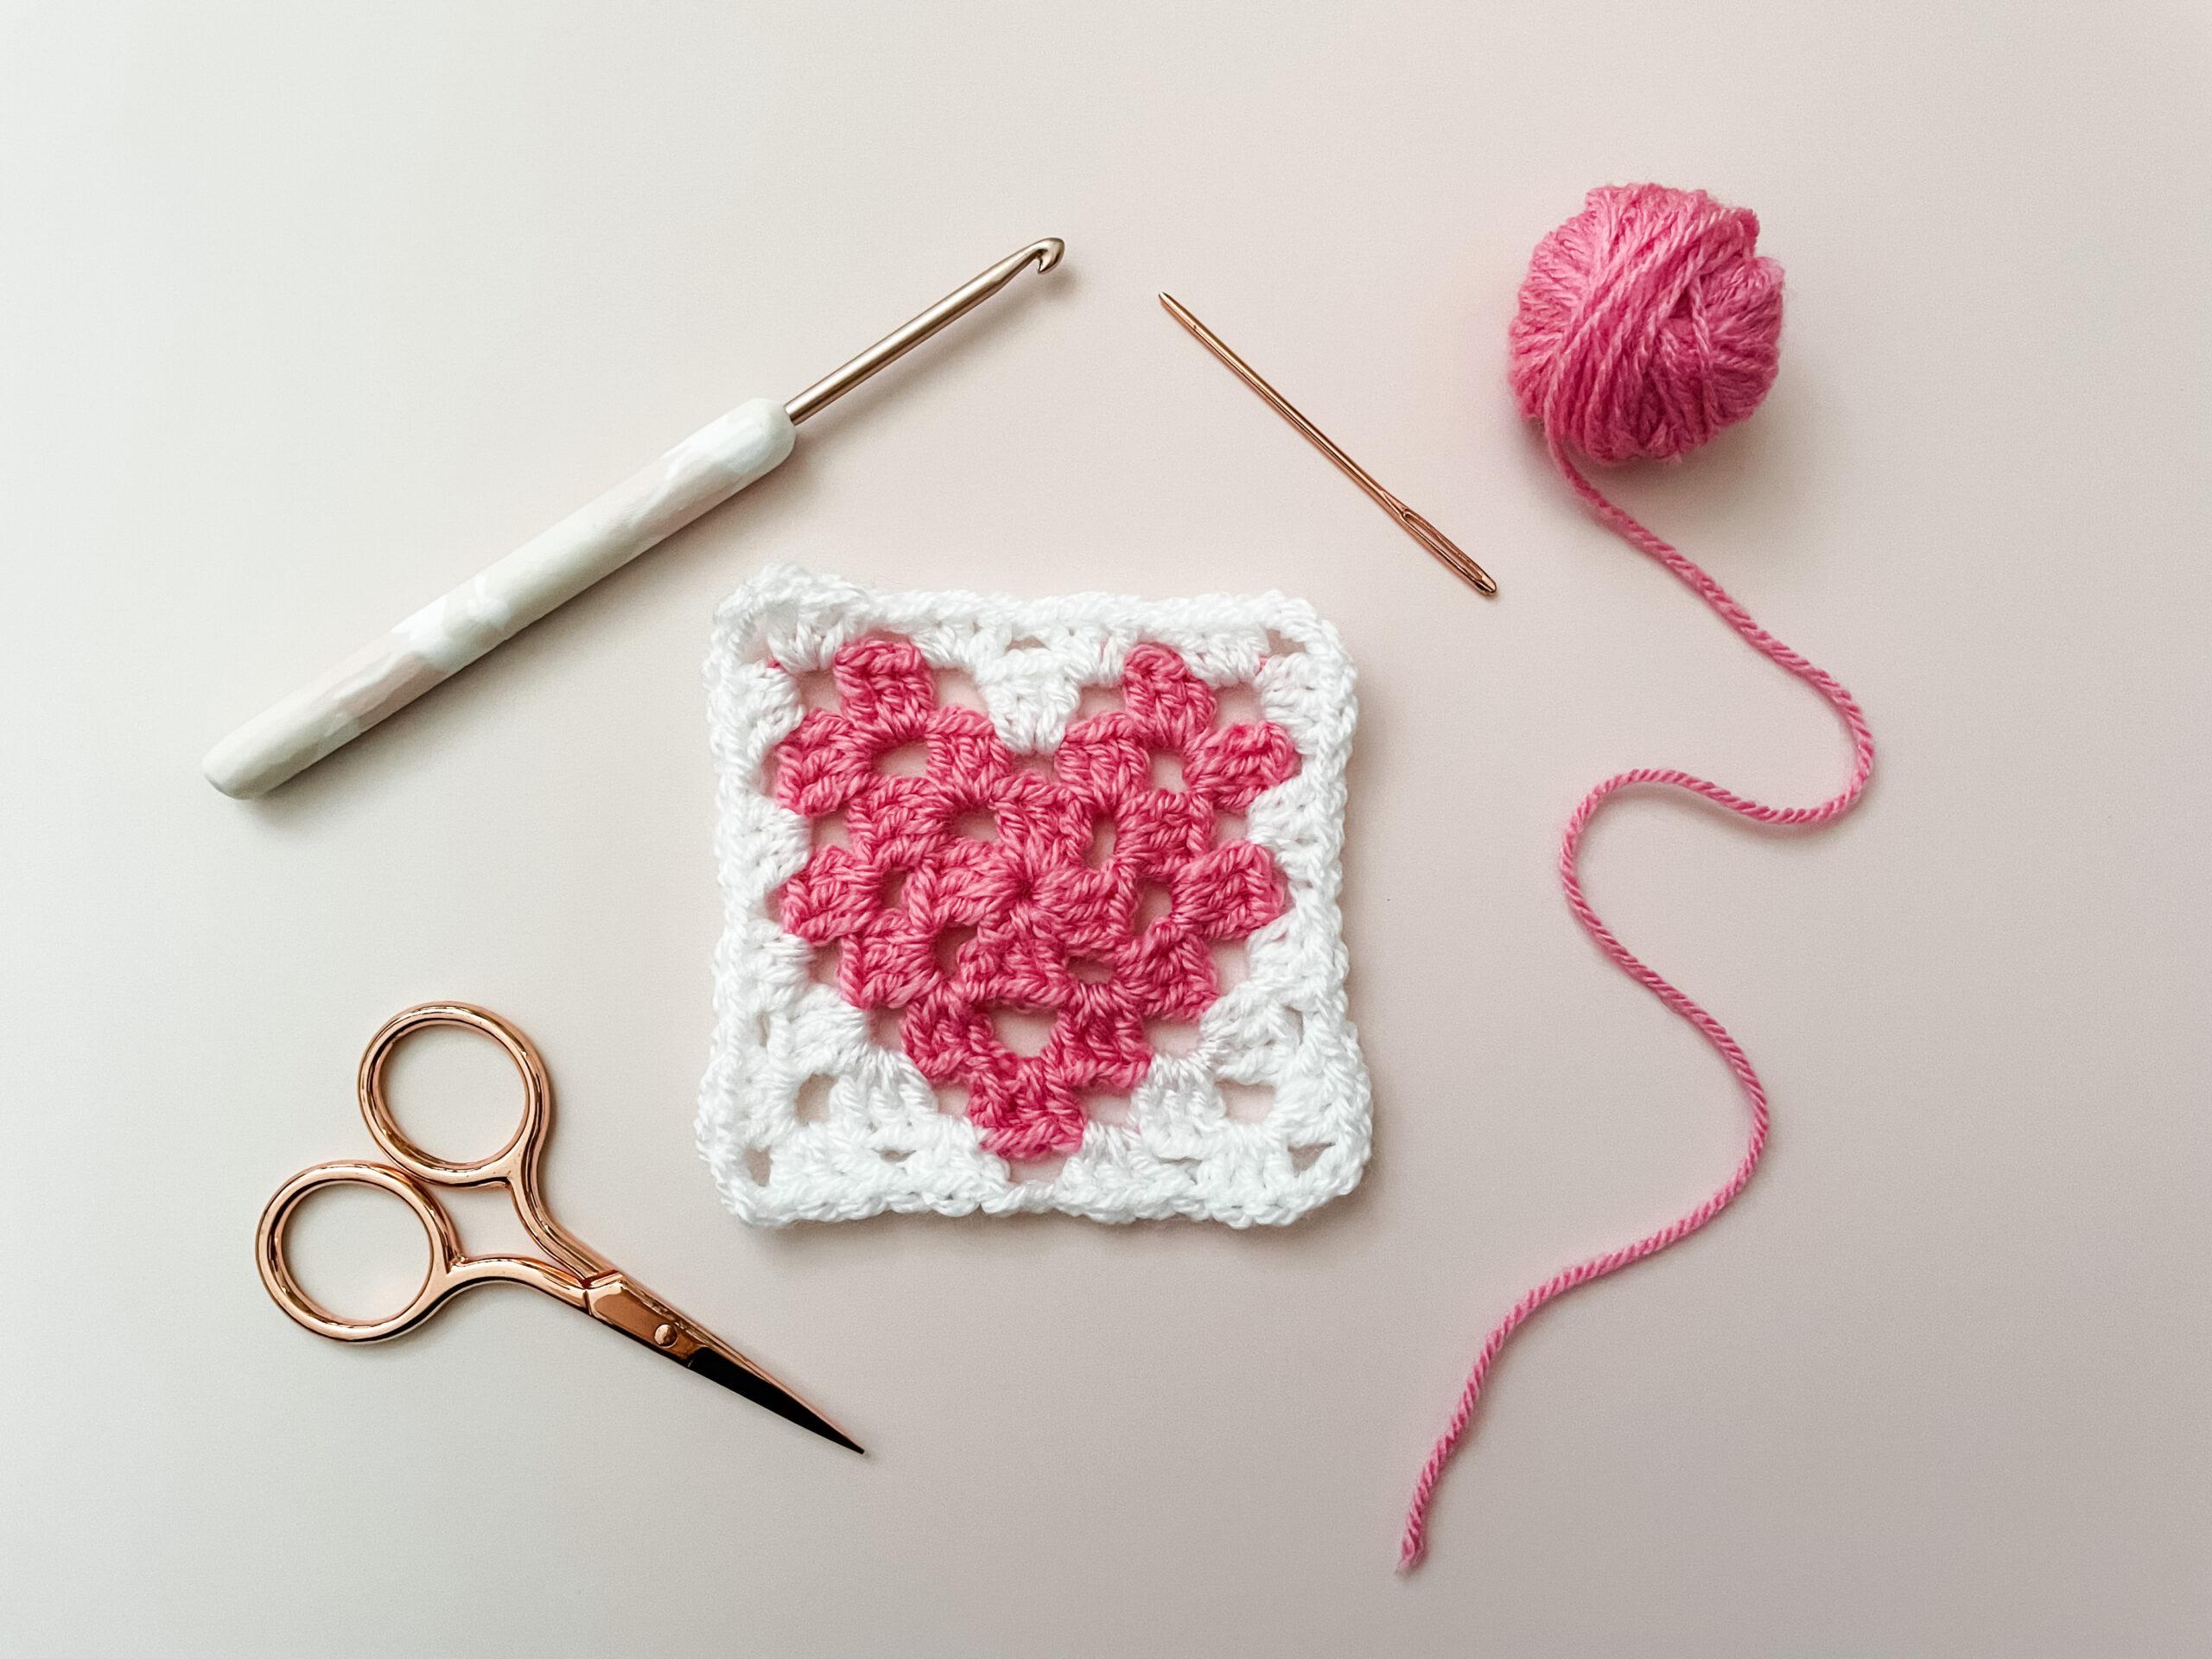 Red Heart Granny Square Yarn 